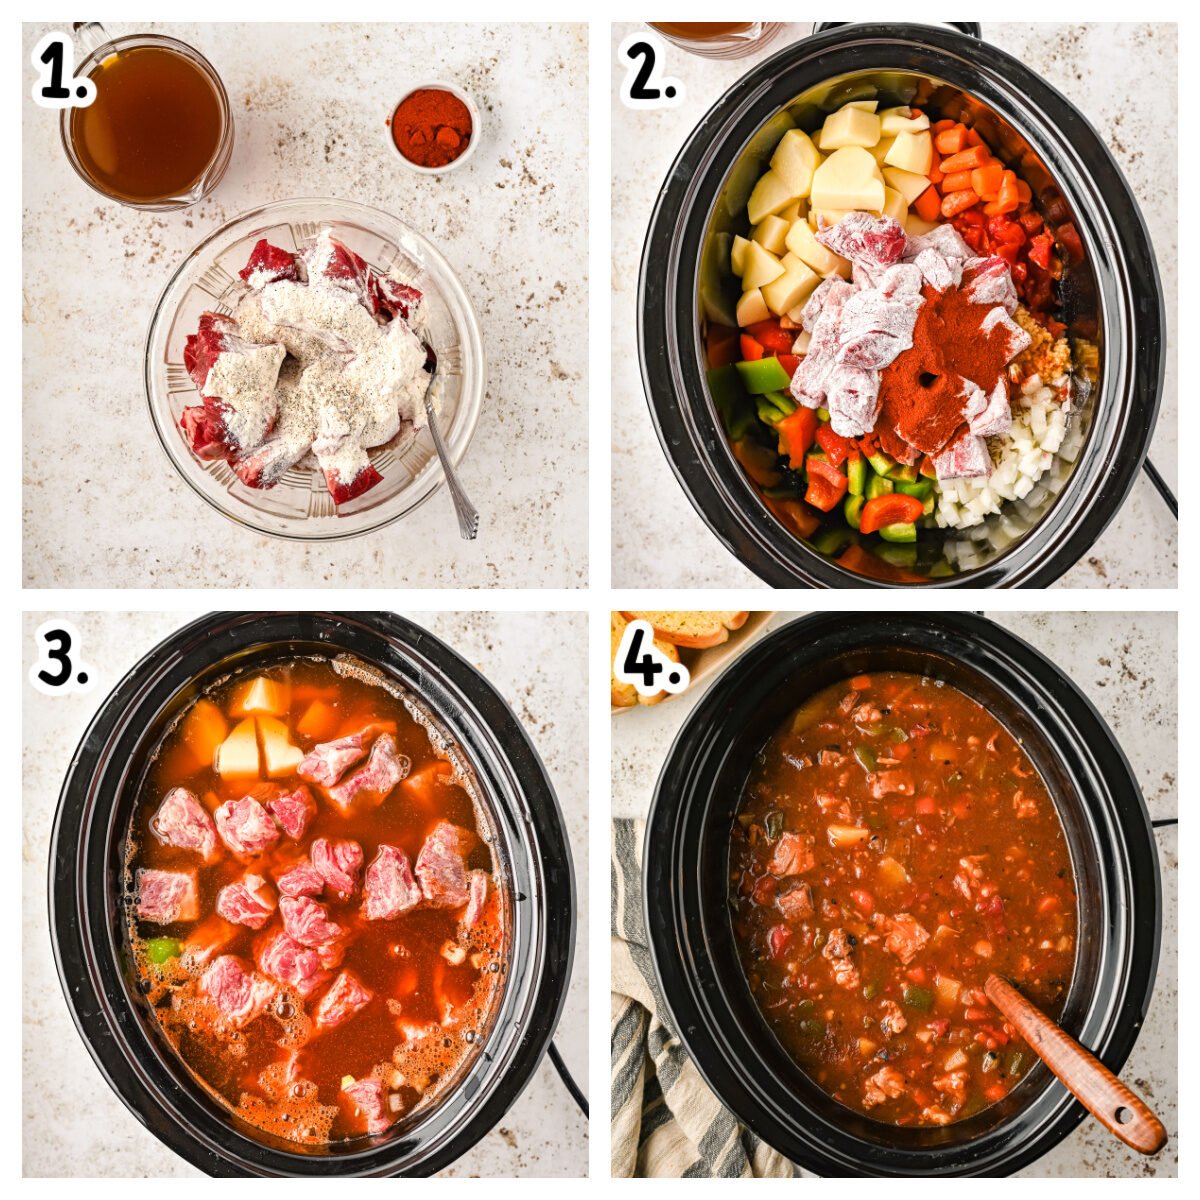 4 images showing how to make hungarian goulash in a crock pot.